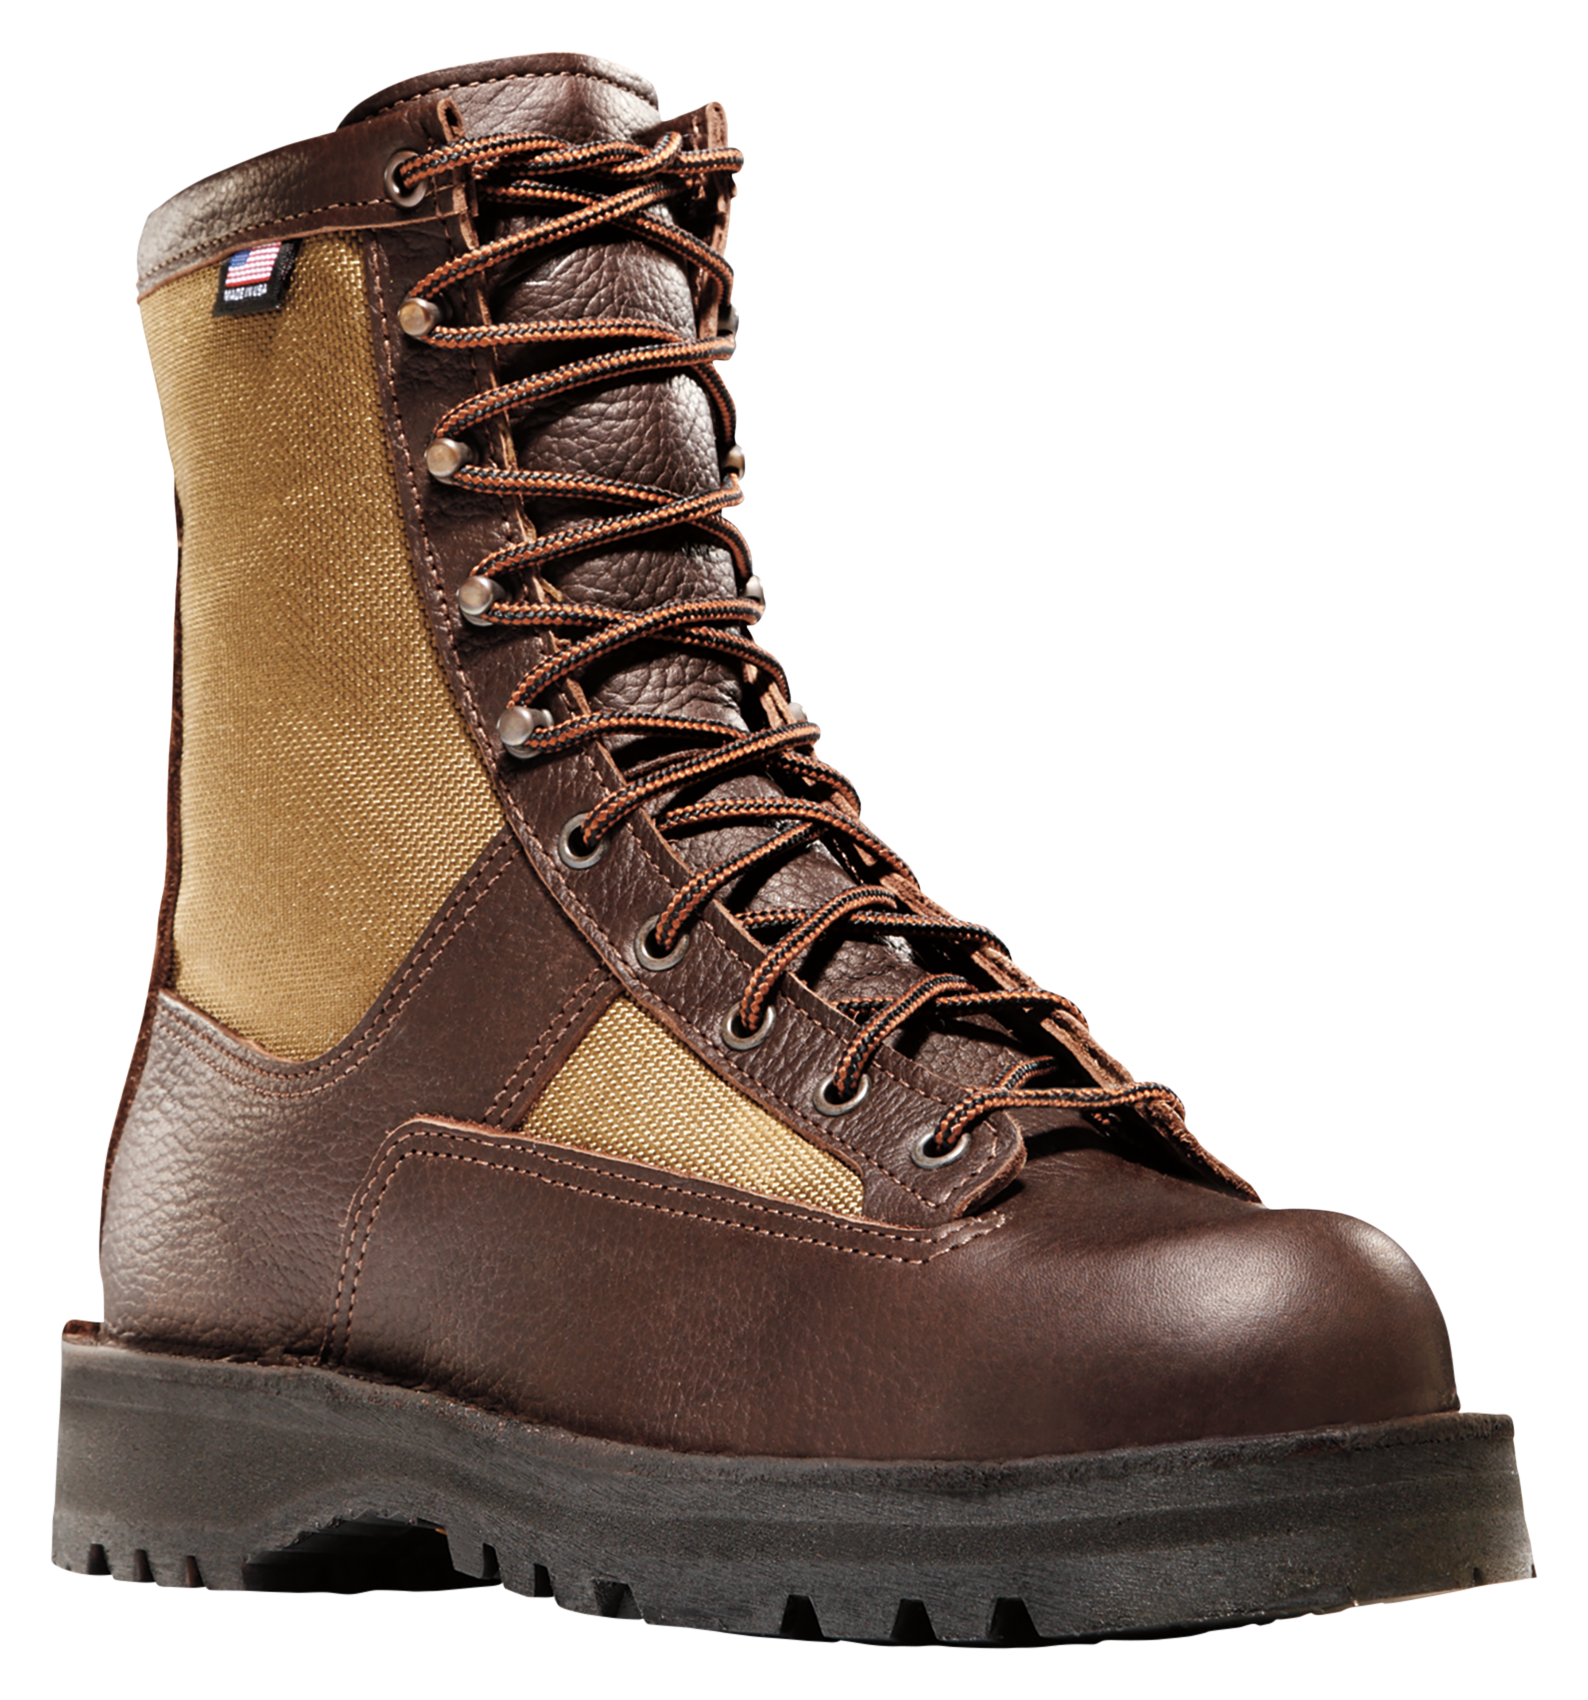 Danner Sierra GORE-TEX Insulated Hunting Boots for Men - Brown - 9.5W